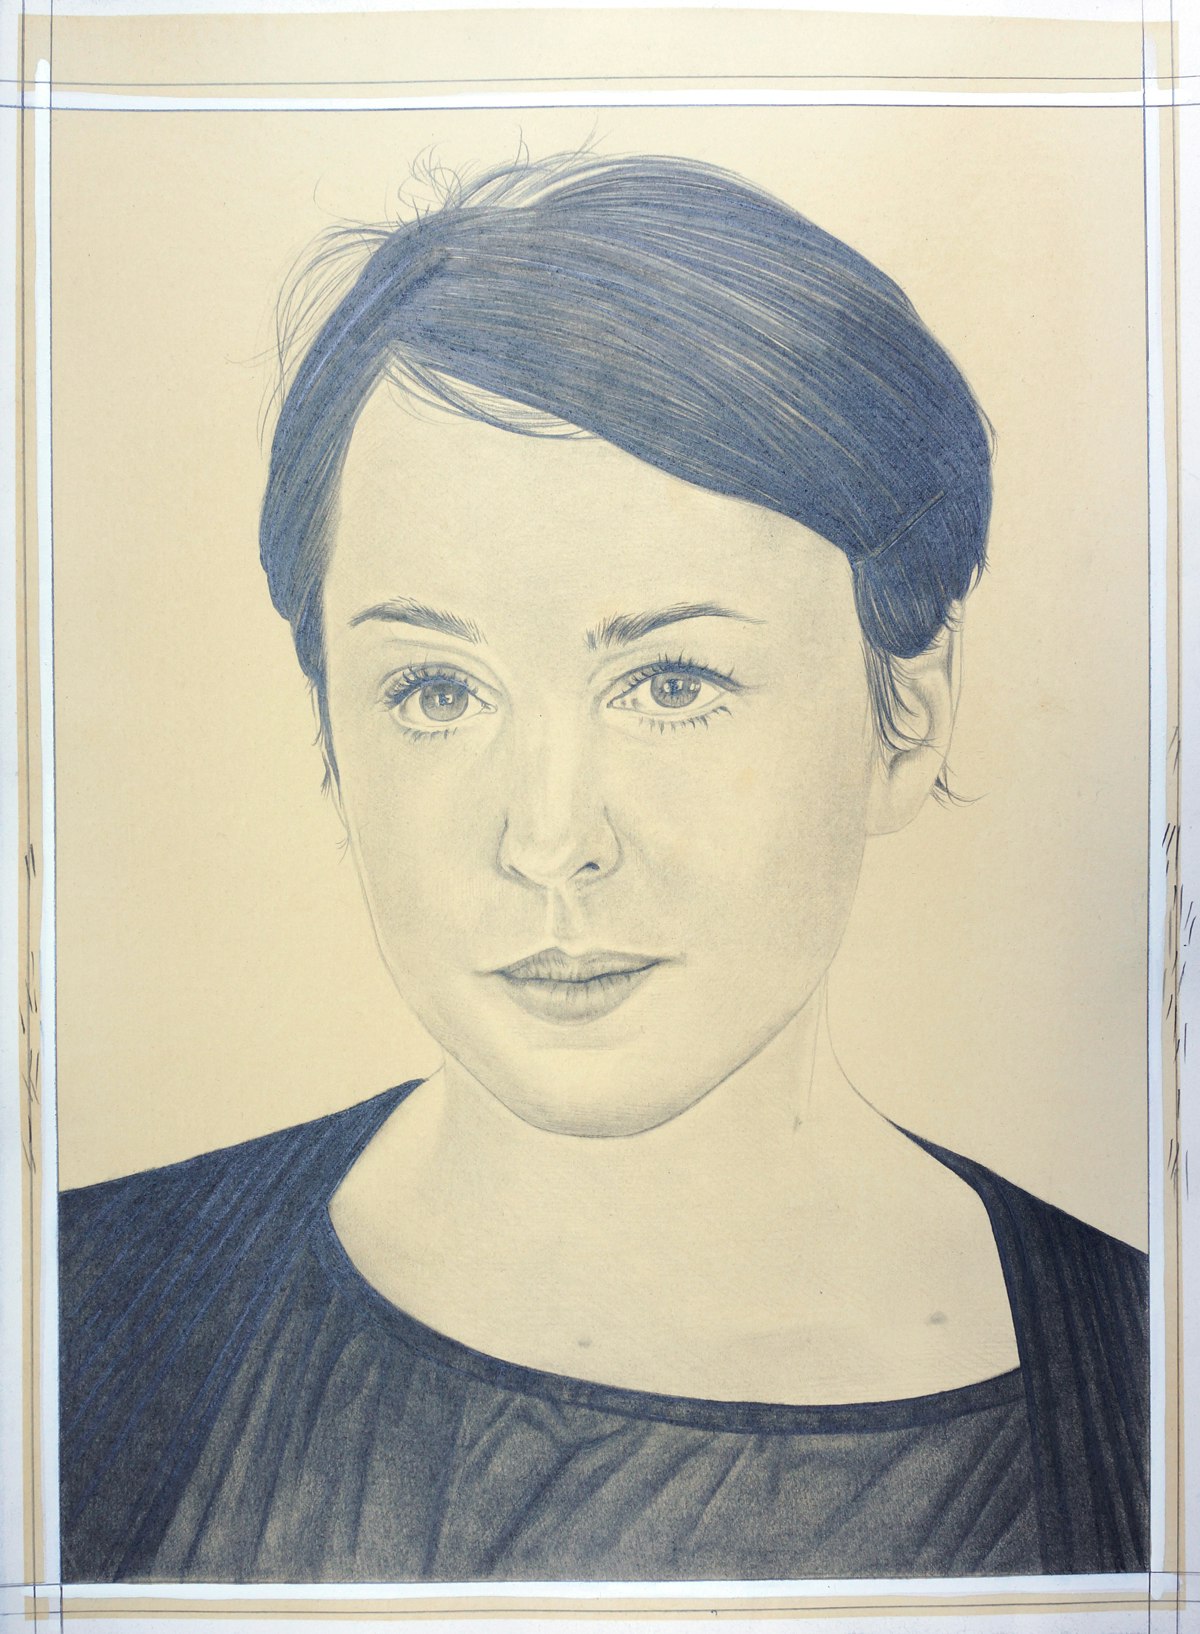 Portrait of Jane Benson, pencil on paper by Phong Bui.